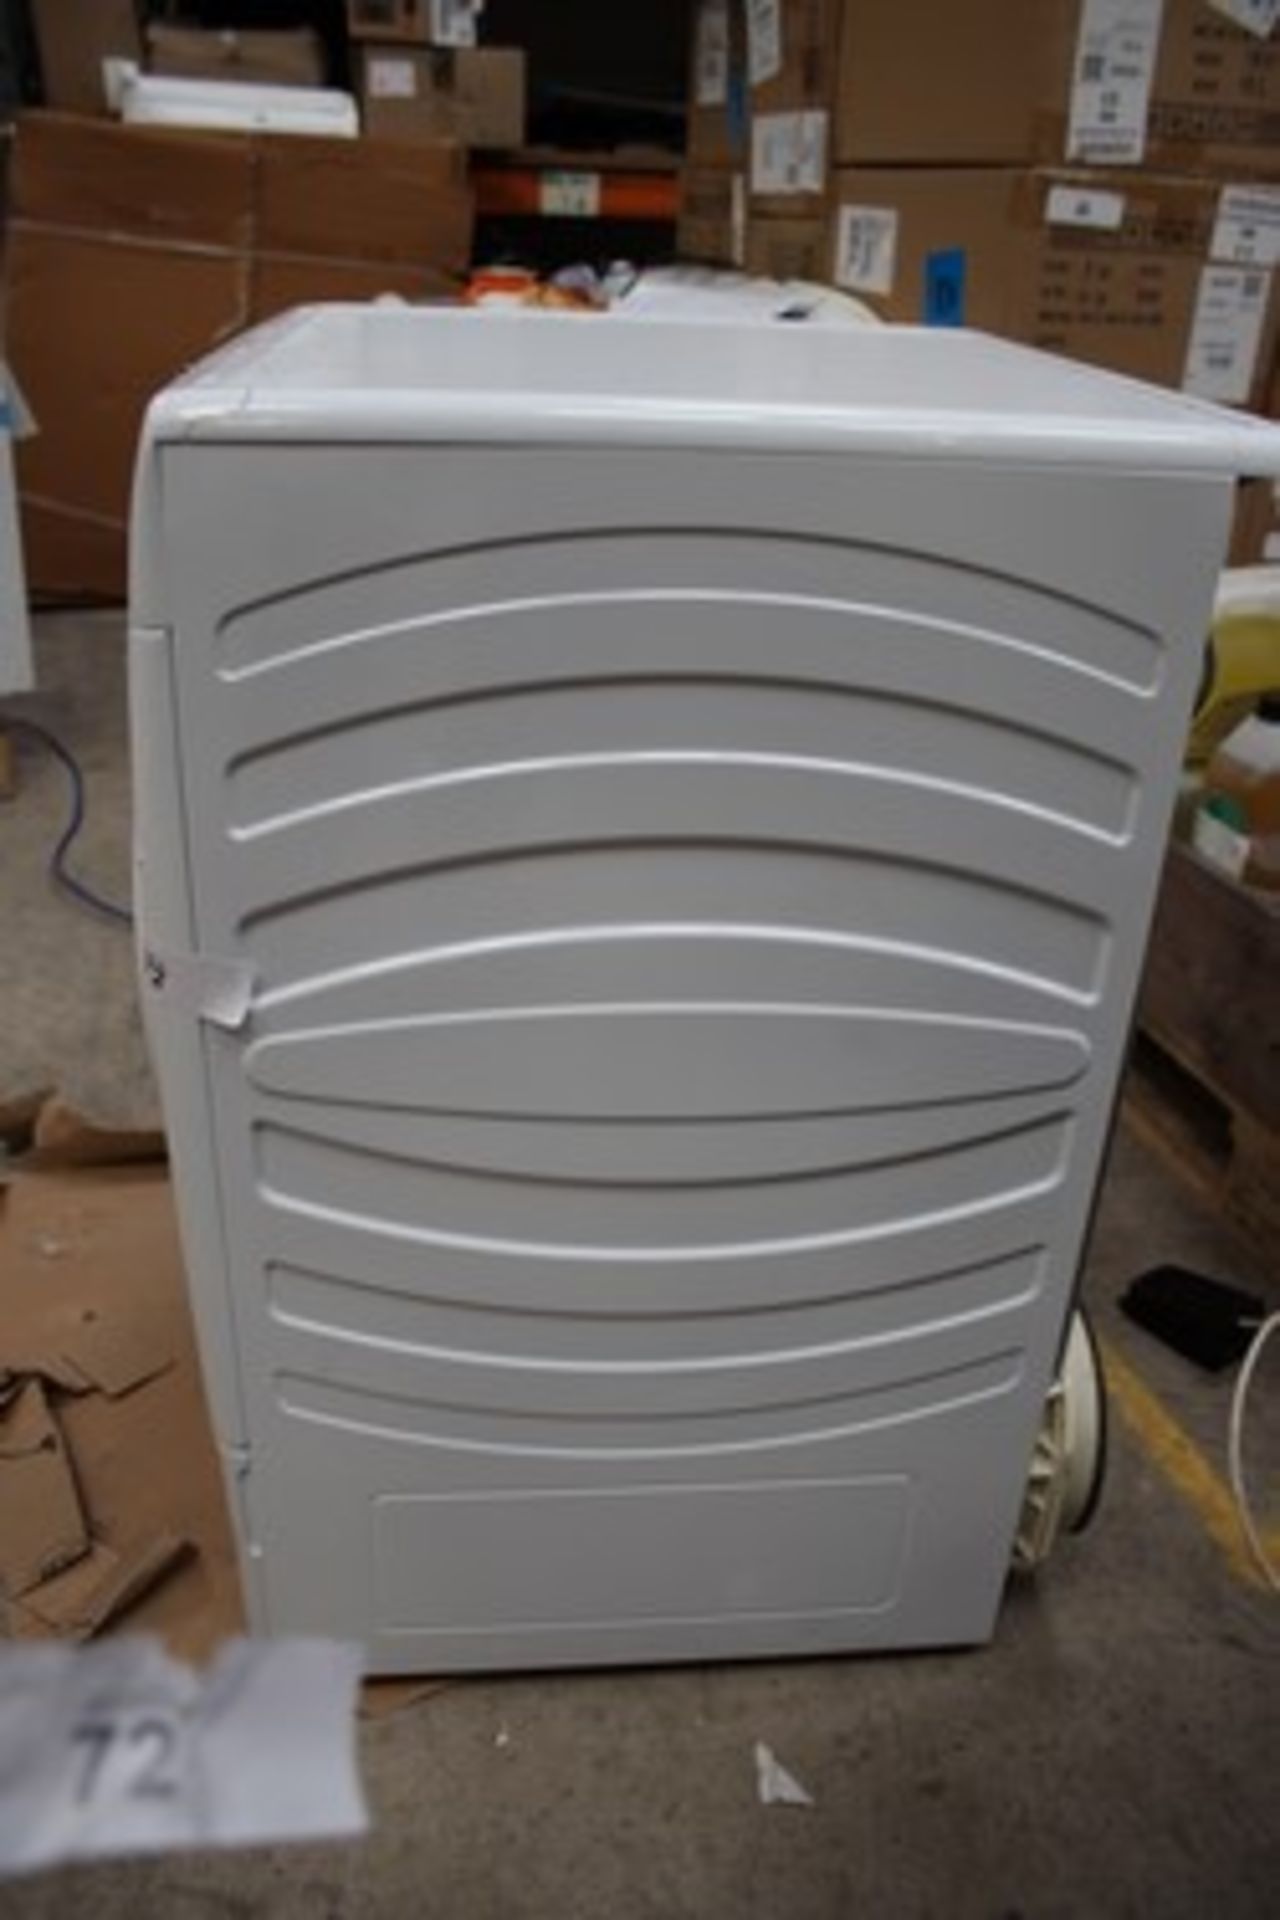 1 x Hoover 8kg heat pump tumble dryer, model: HLEH8A2TE, white, no visible damage, powers on, (56) - - Image 2 of 4